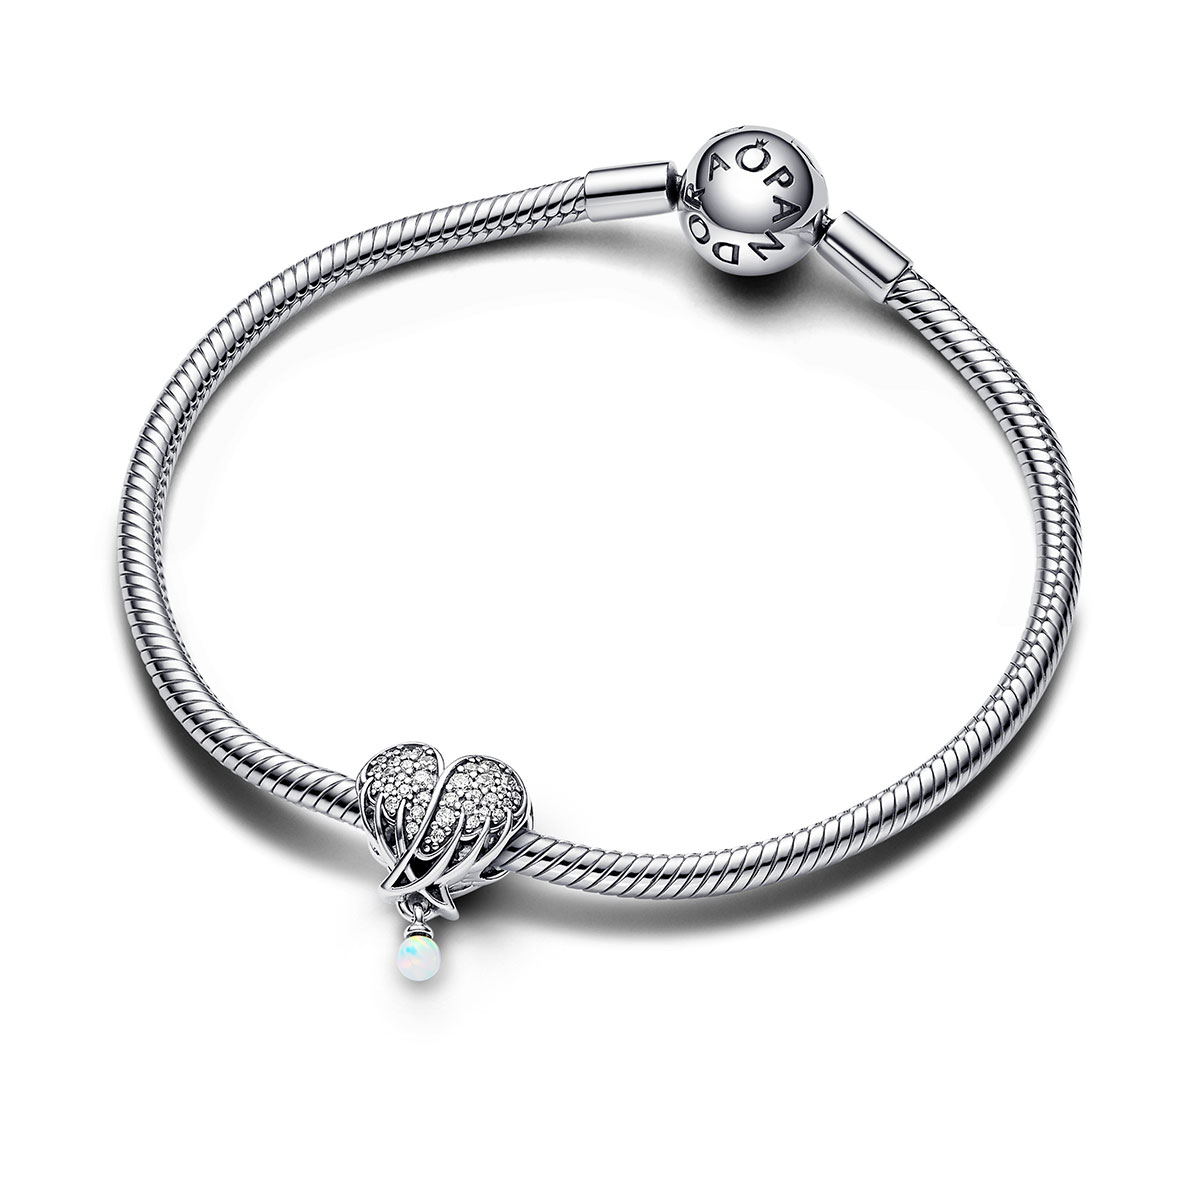 Sparkling Angel Wings & Heart Charm